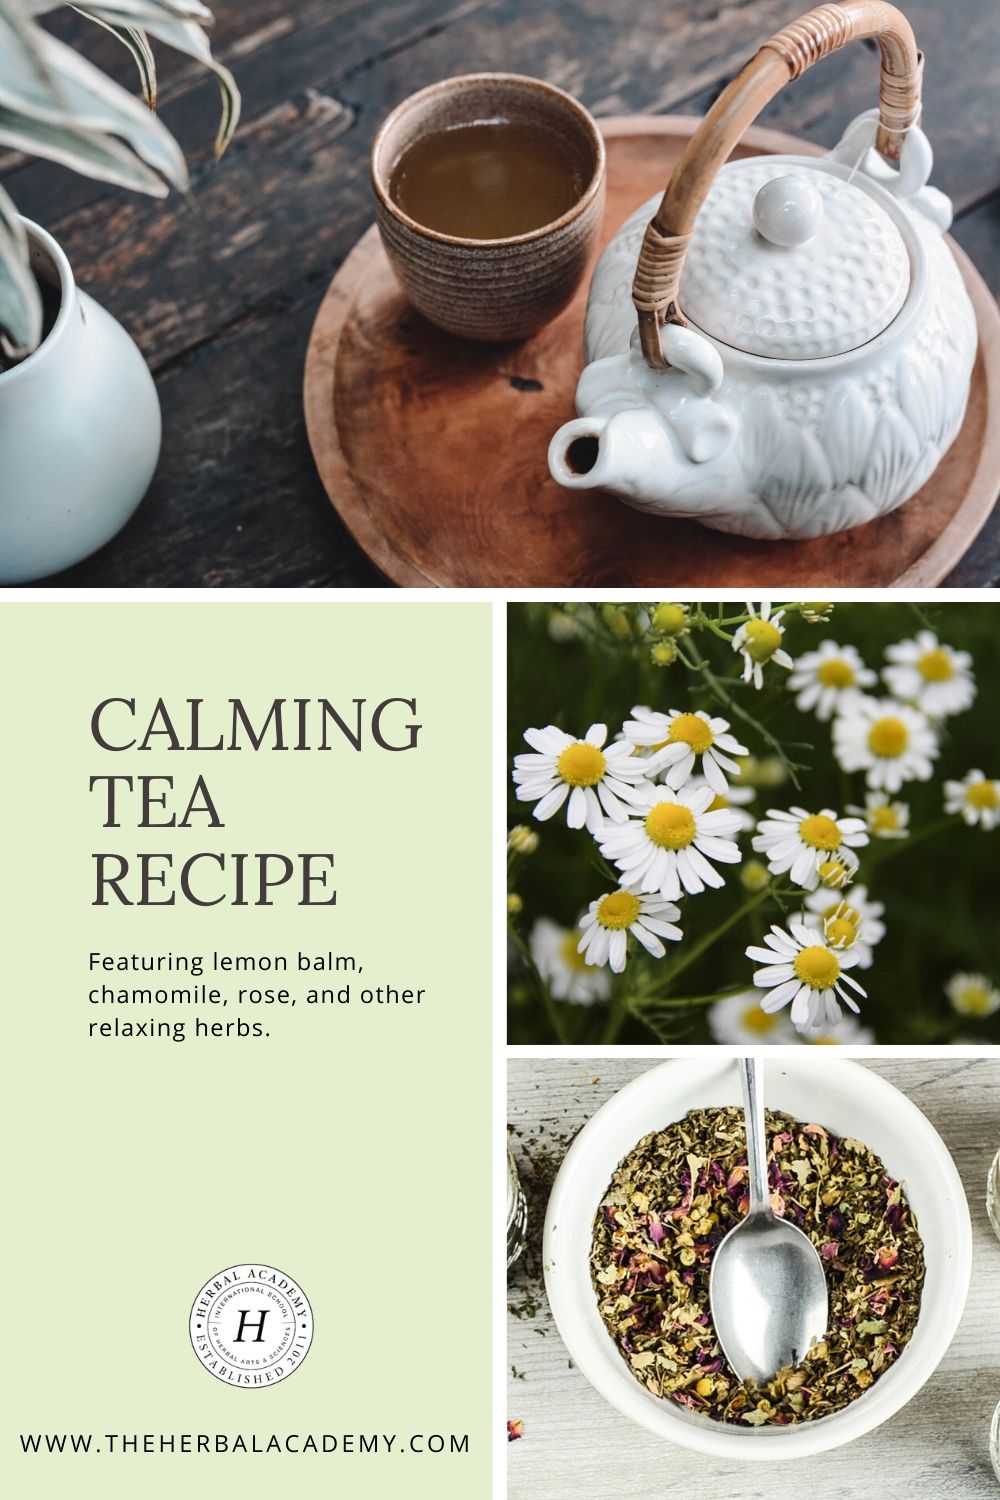 Calming Tea Recipe & Natural Stress Management (With Video!) | The Herbal Academy | Simple lifestyle practices to go-to formulas, like our Calming Tea Recipe, can help us better manage and cope with stress naturally.